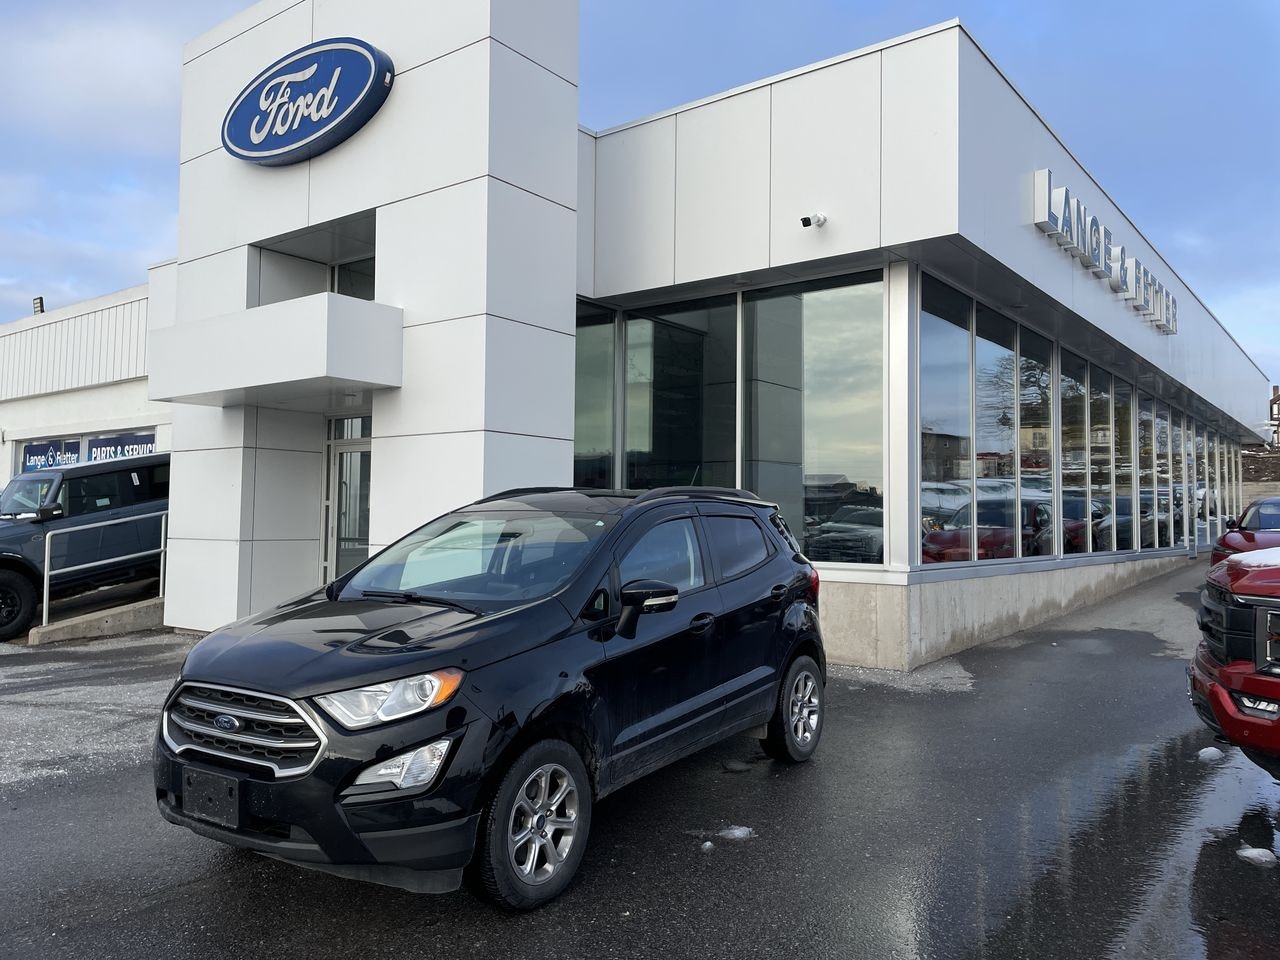 2018 Ford EcoSport - P21109A Full Image 1